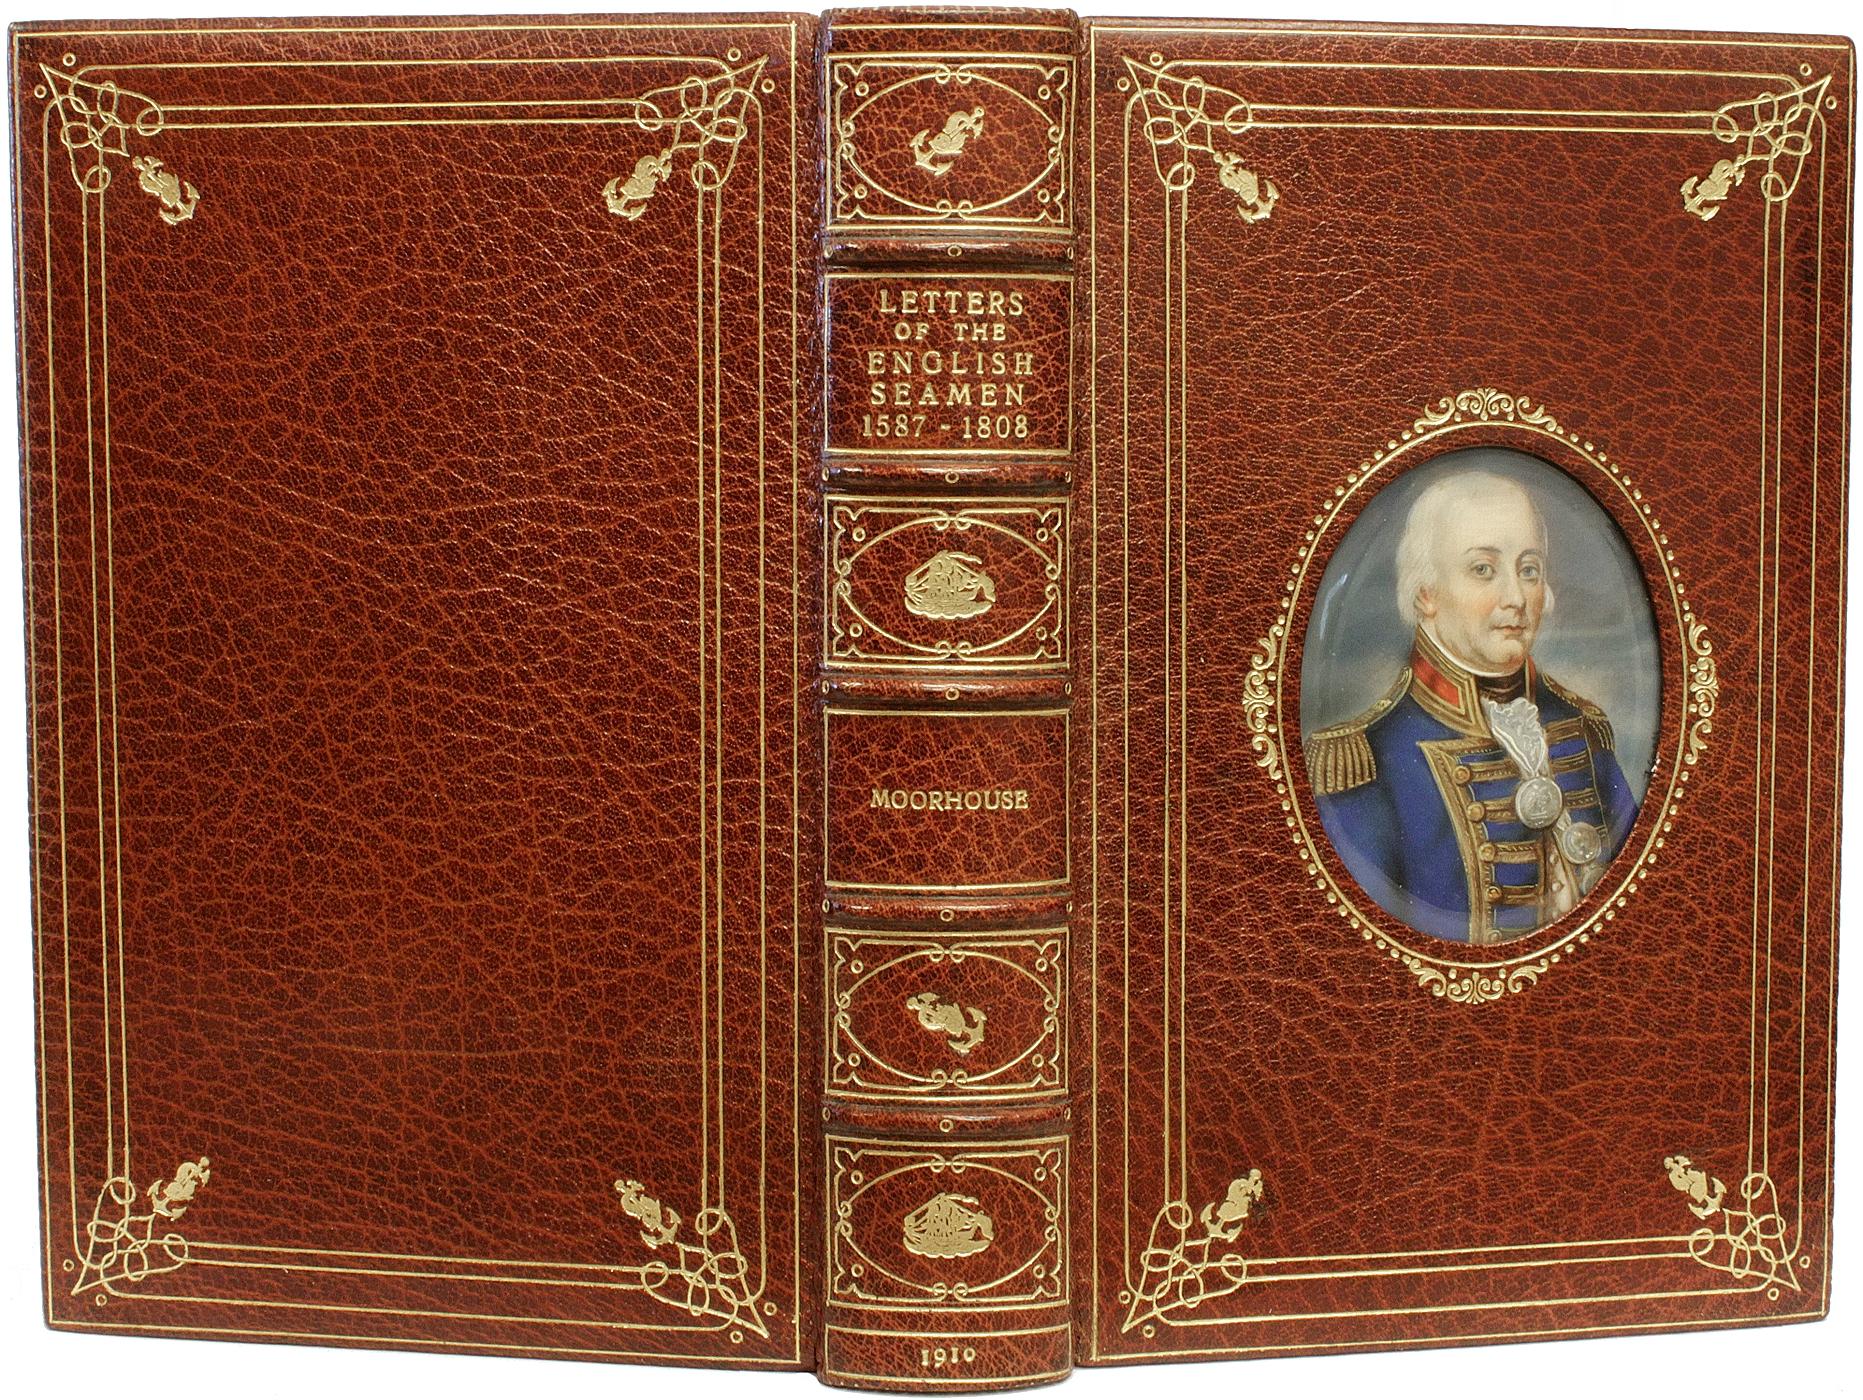 British MOORHOUSE. Letters Of The English Seamen: 1587-1808. IN A FINE COSWAY BINDING ! For Sale